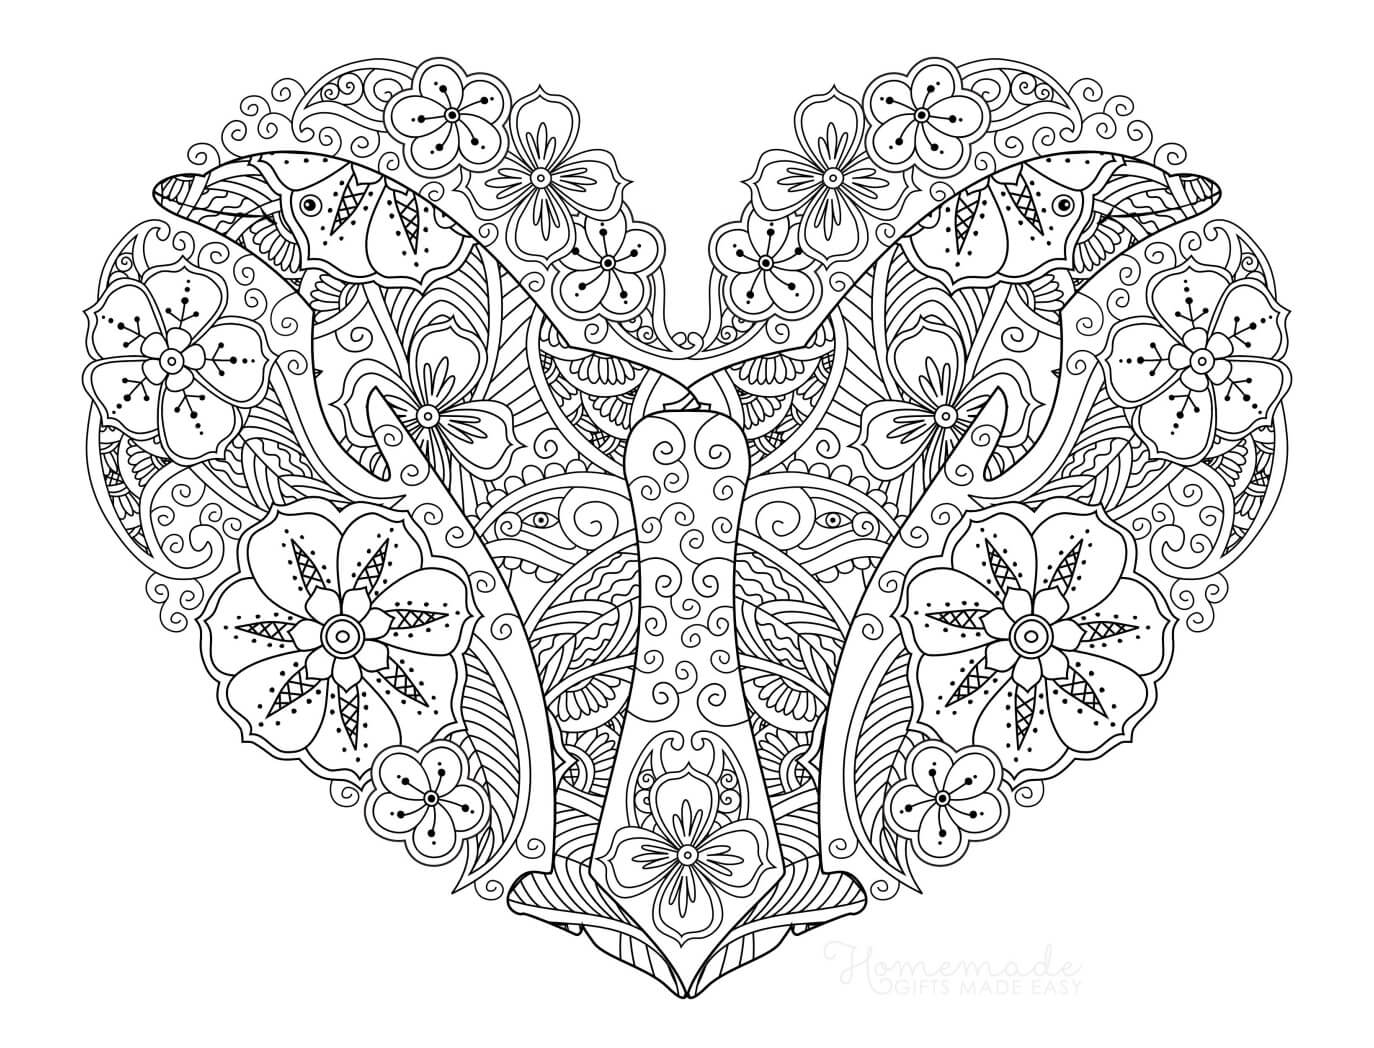 heart coloring pages for adults | love coloring pages for adults | heart coloring pages anatomy